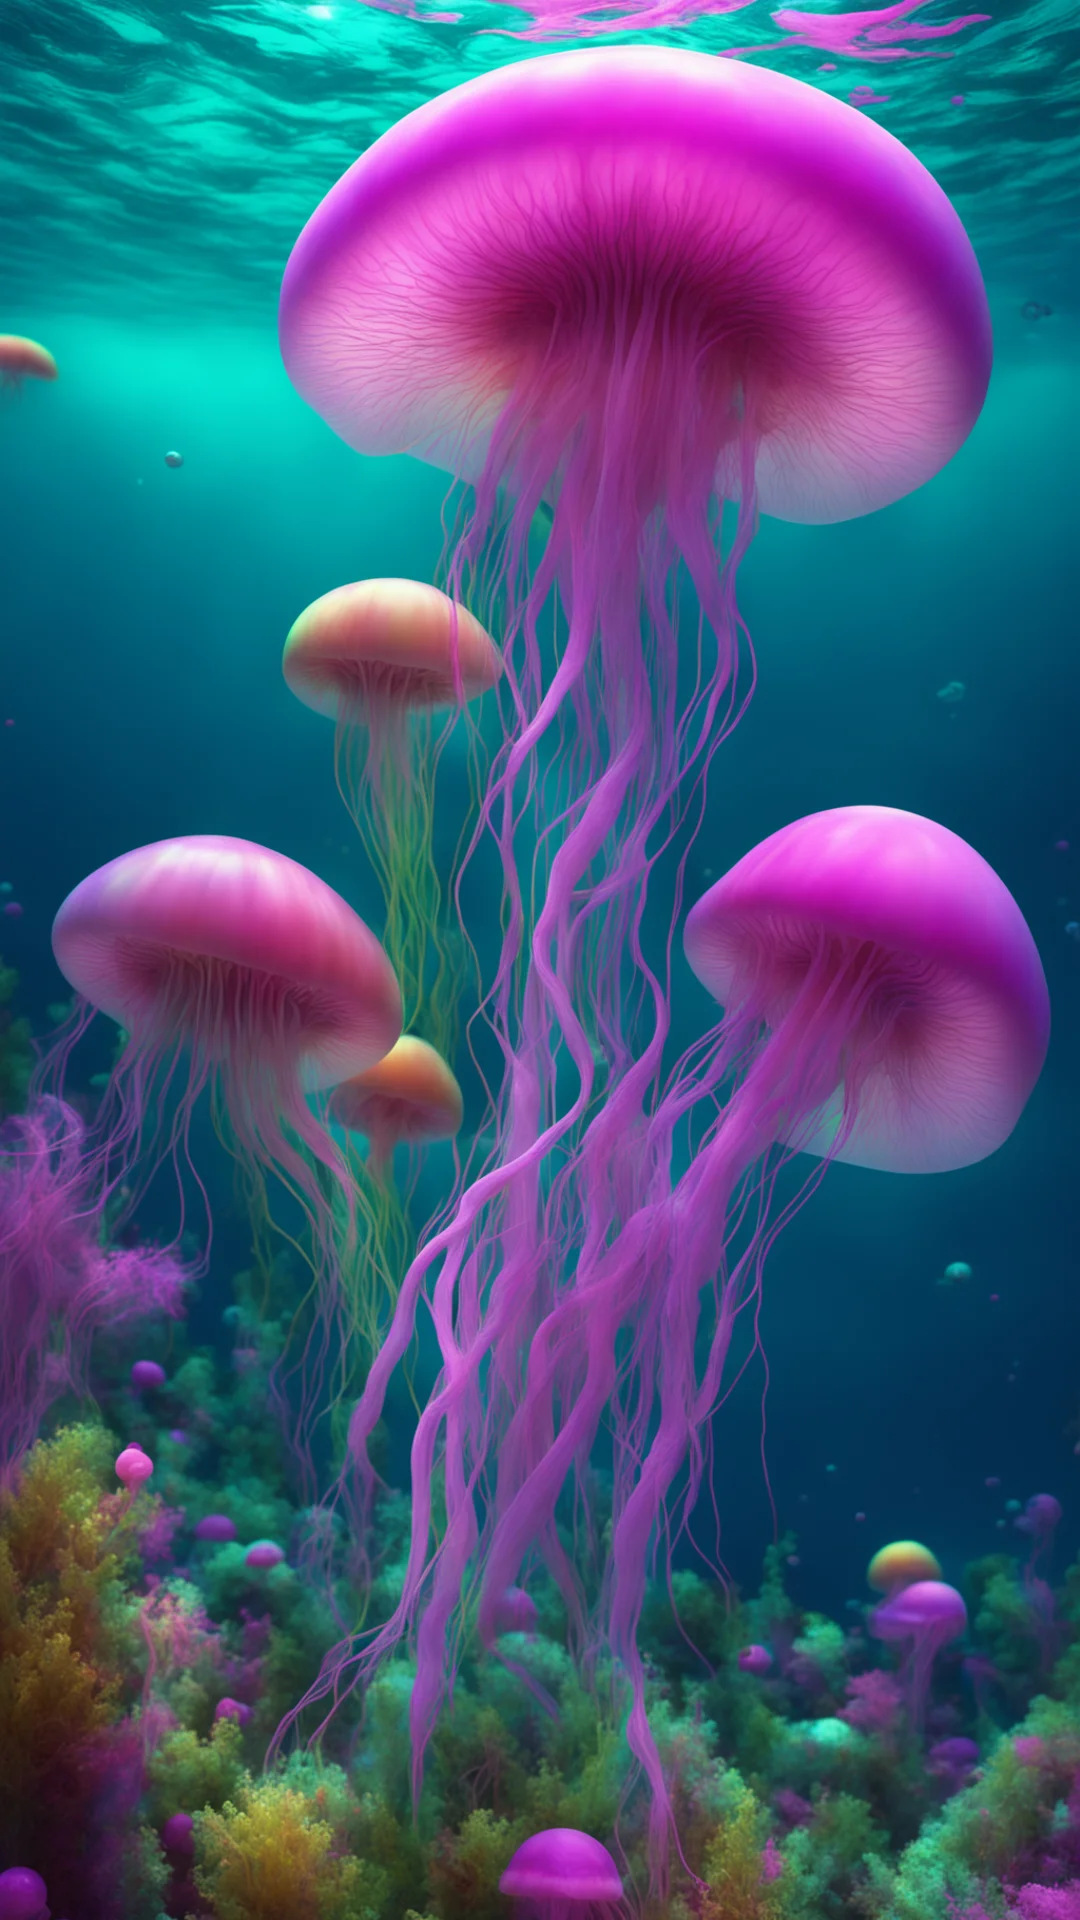 artstation art underwater full of strange jellyfish colorful cgi 3d surreal confident engaging wow 3 tall